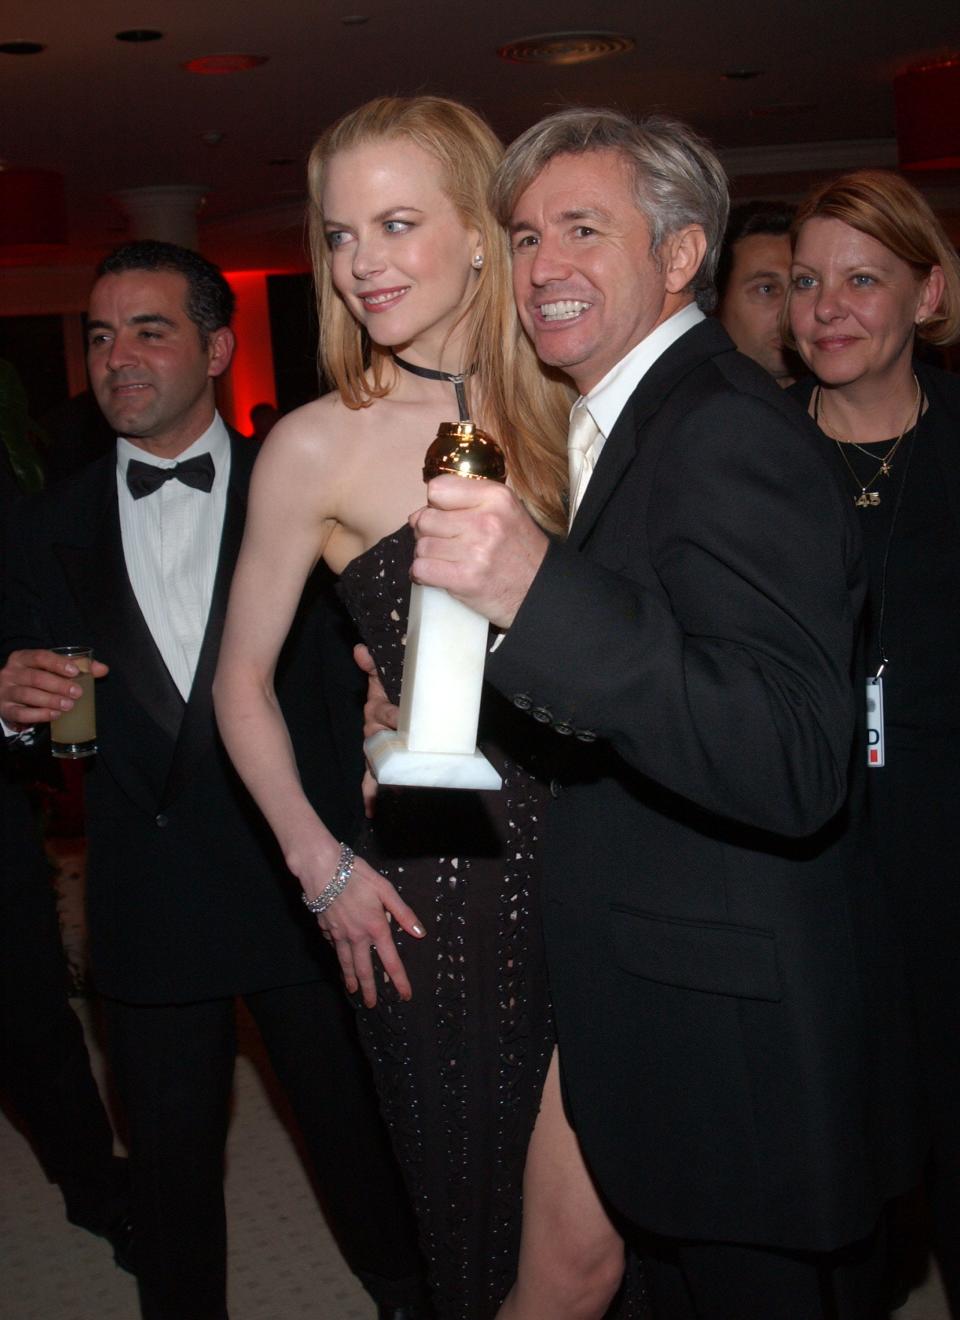 Nicole Kidman, left, and Baz Luhrmann at a Golden Globes after-party in Los Angeles in 2002.